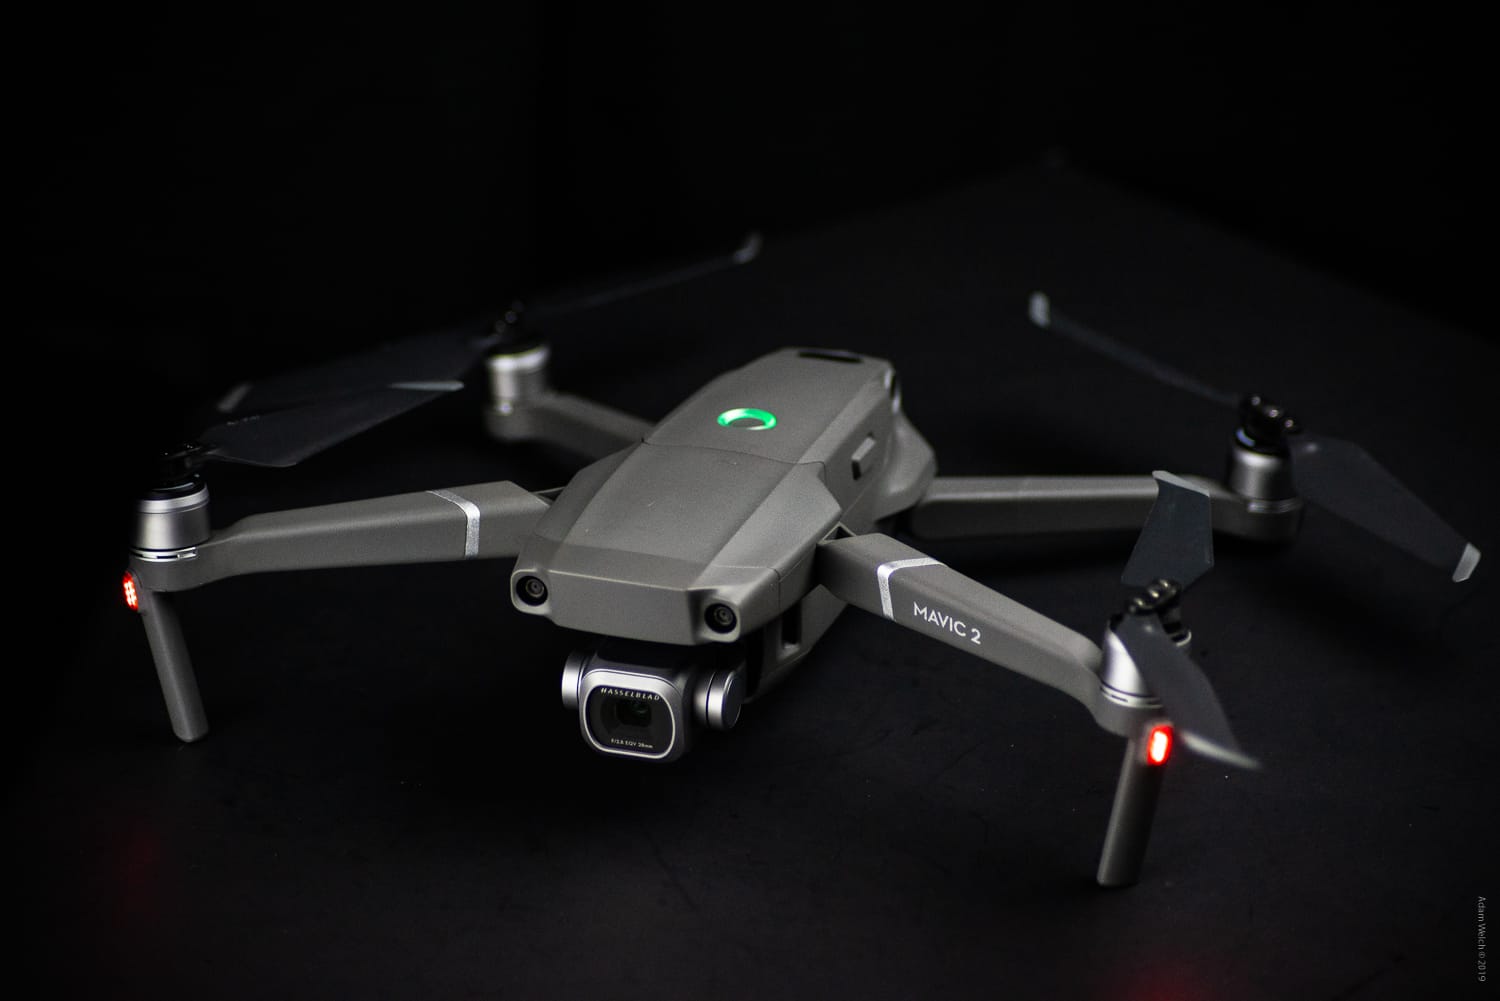 Fahrenheit yesterday Blur Detailed Review of the Mavic 2 Pro Drone from DJI | Contrastly